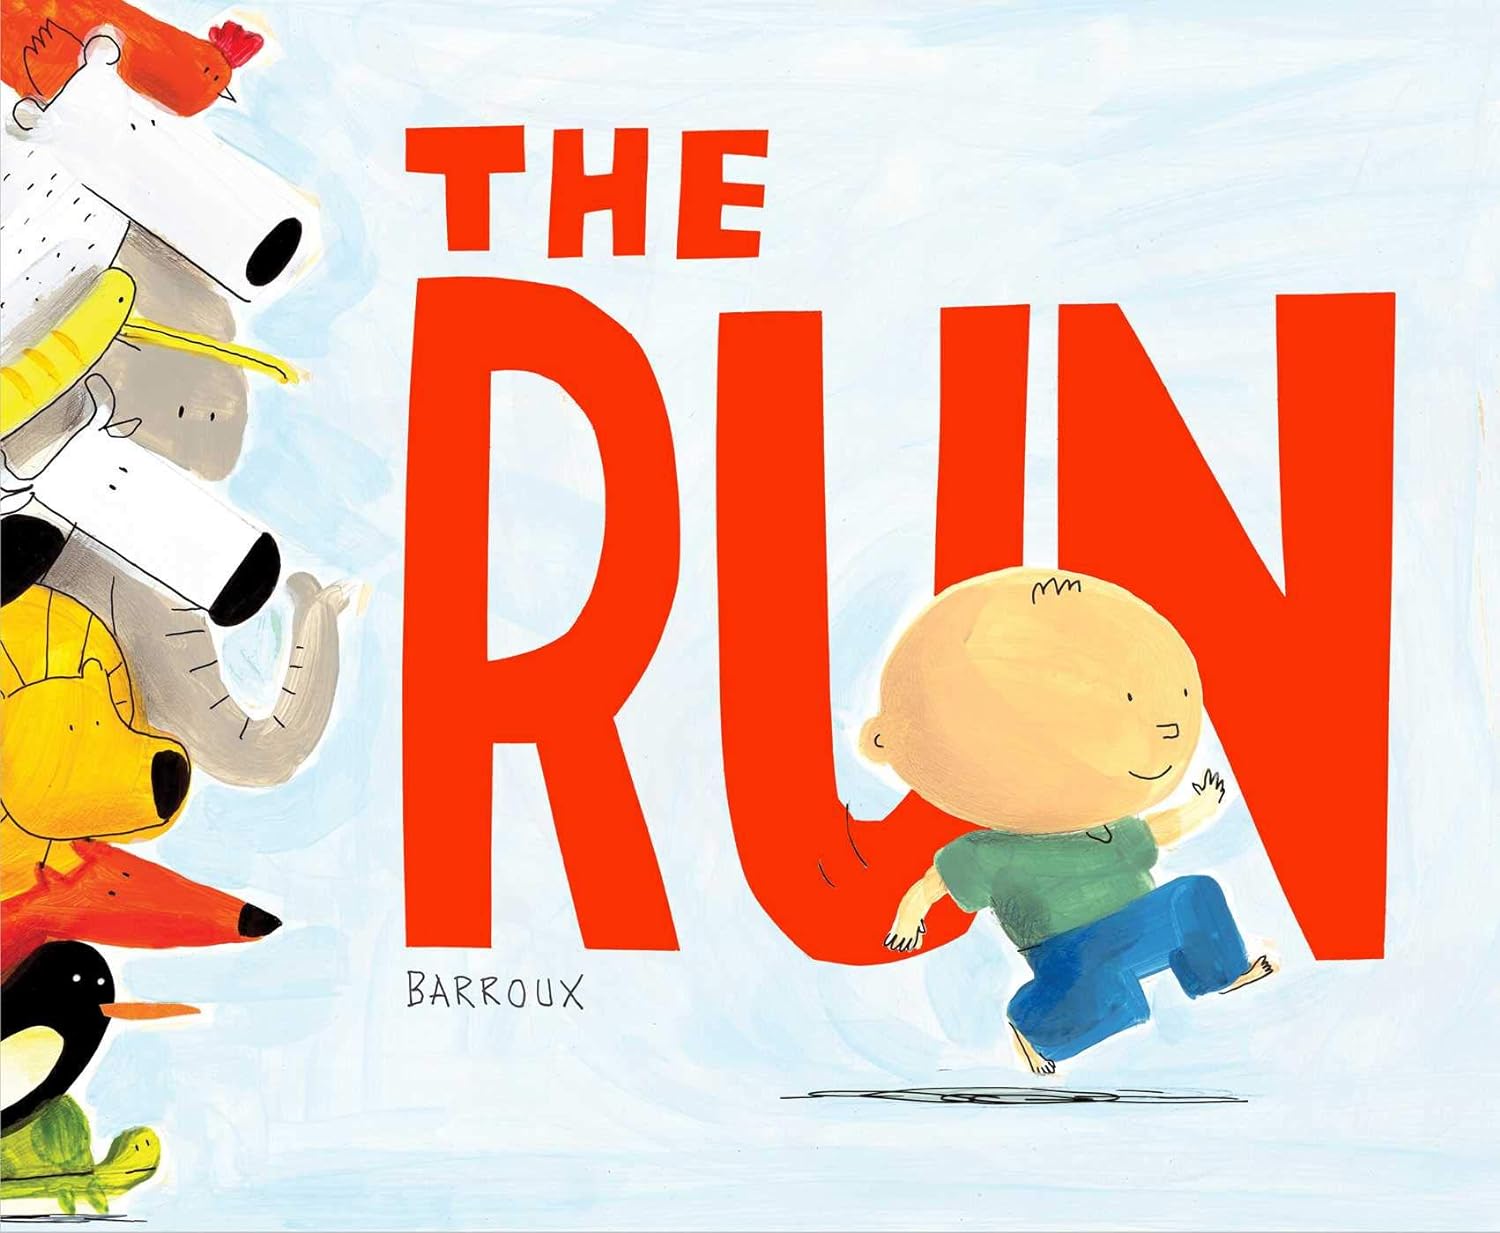 Image for "The Run"